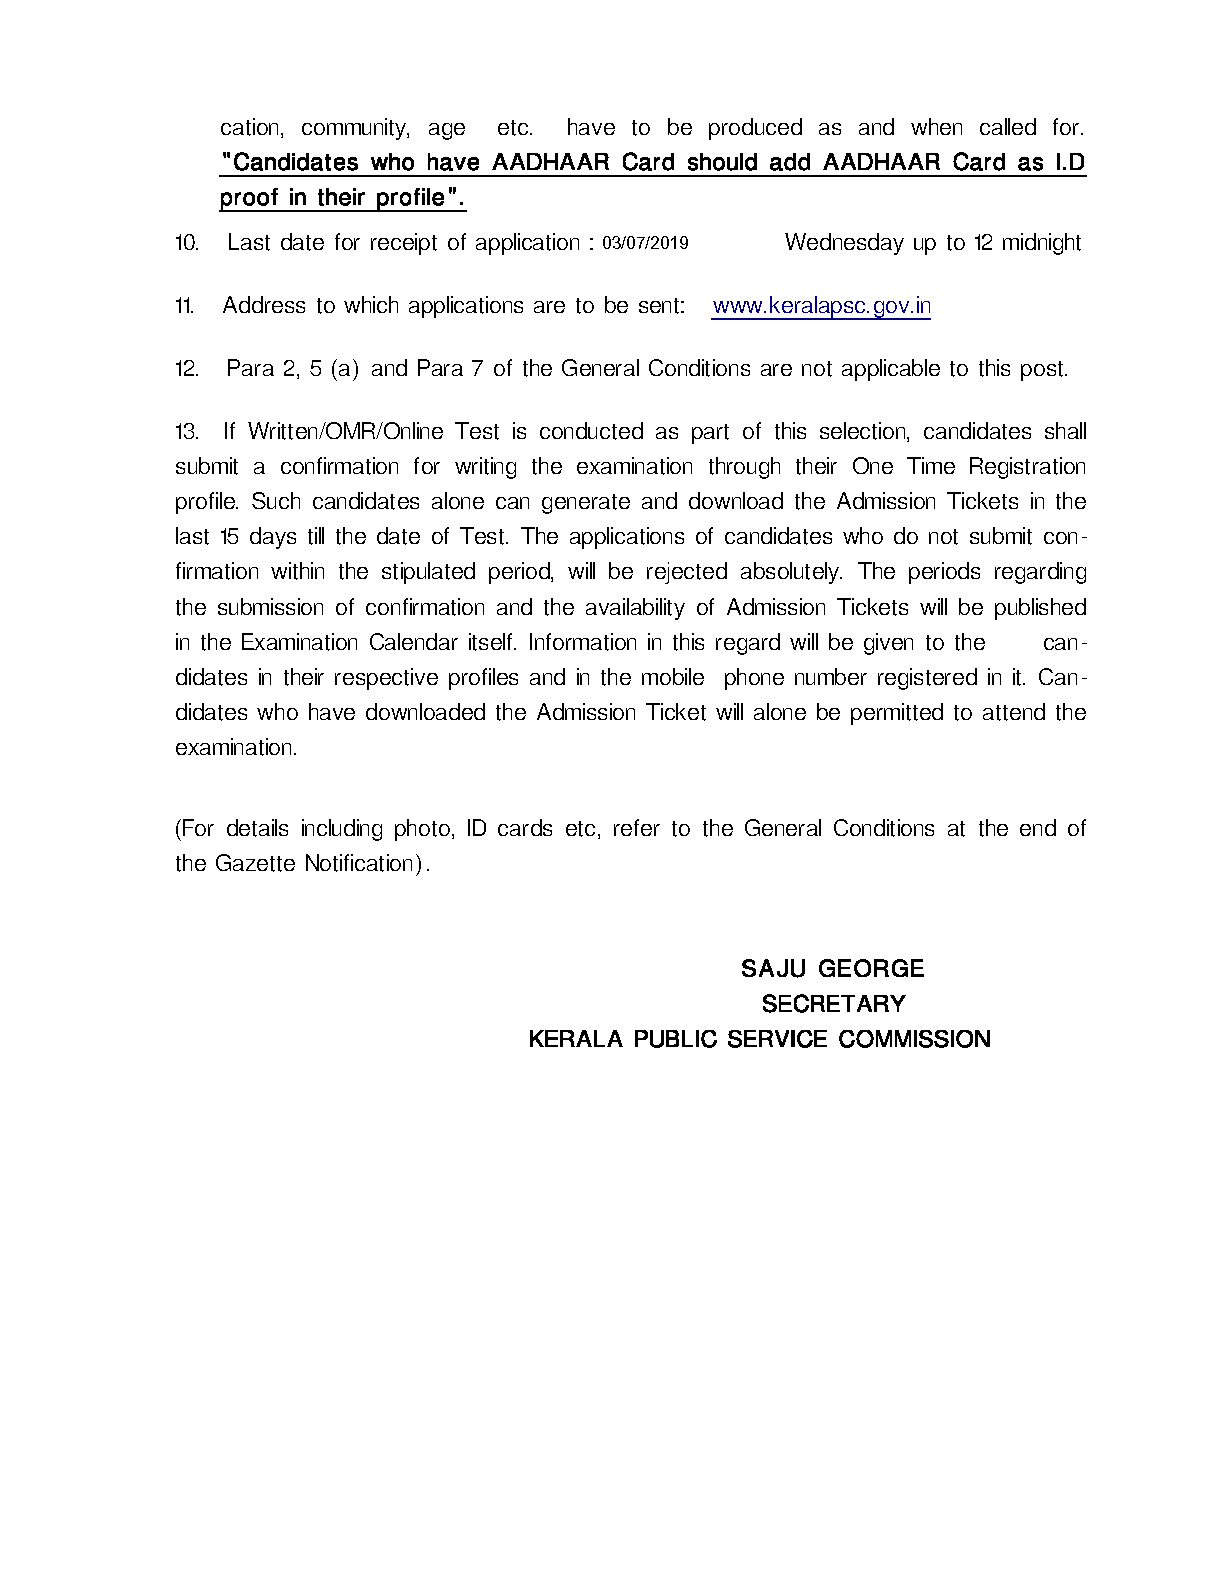 KPSC Quality Control Officer Category 0712019 - Notification Image 5